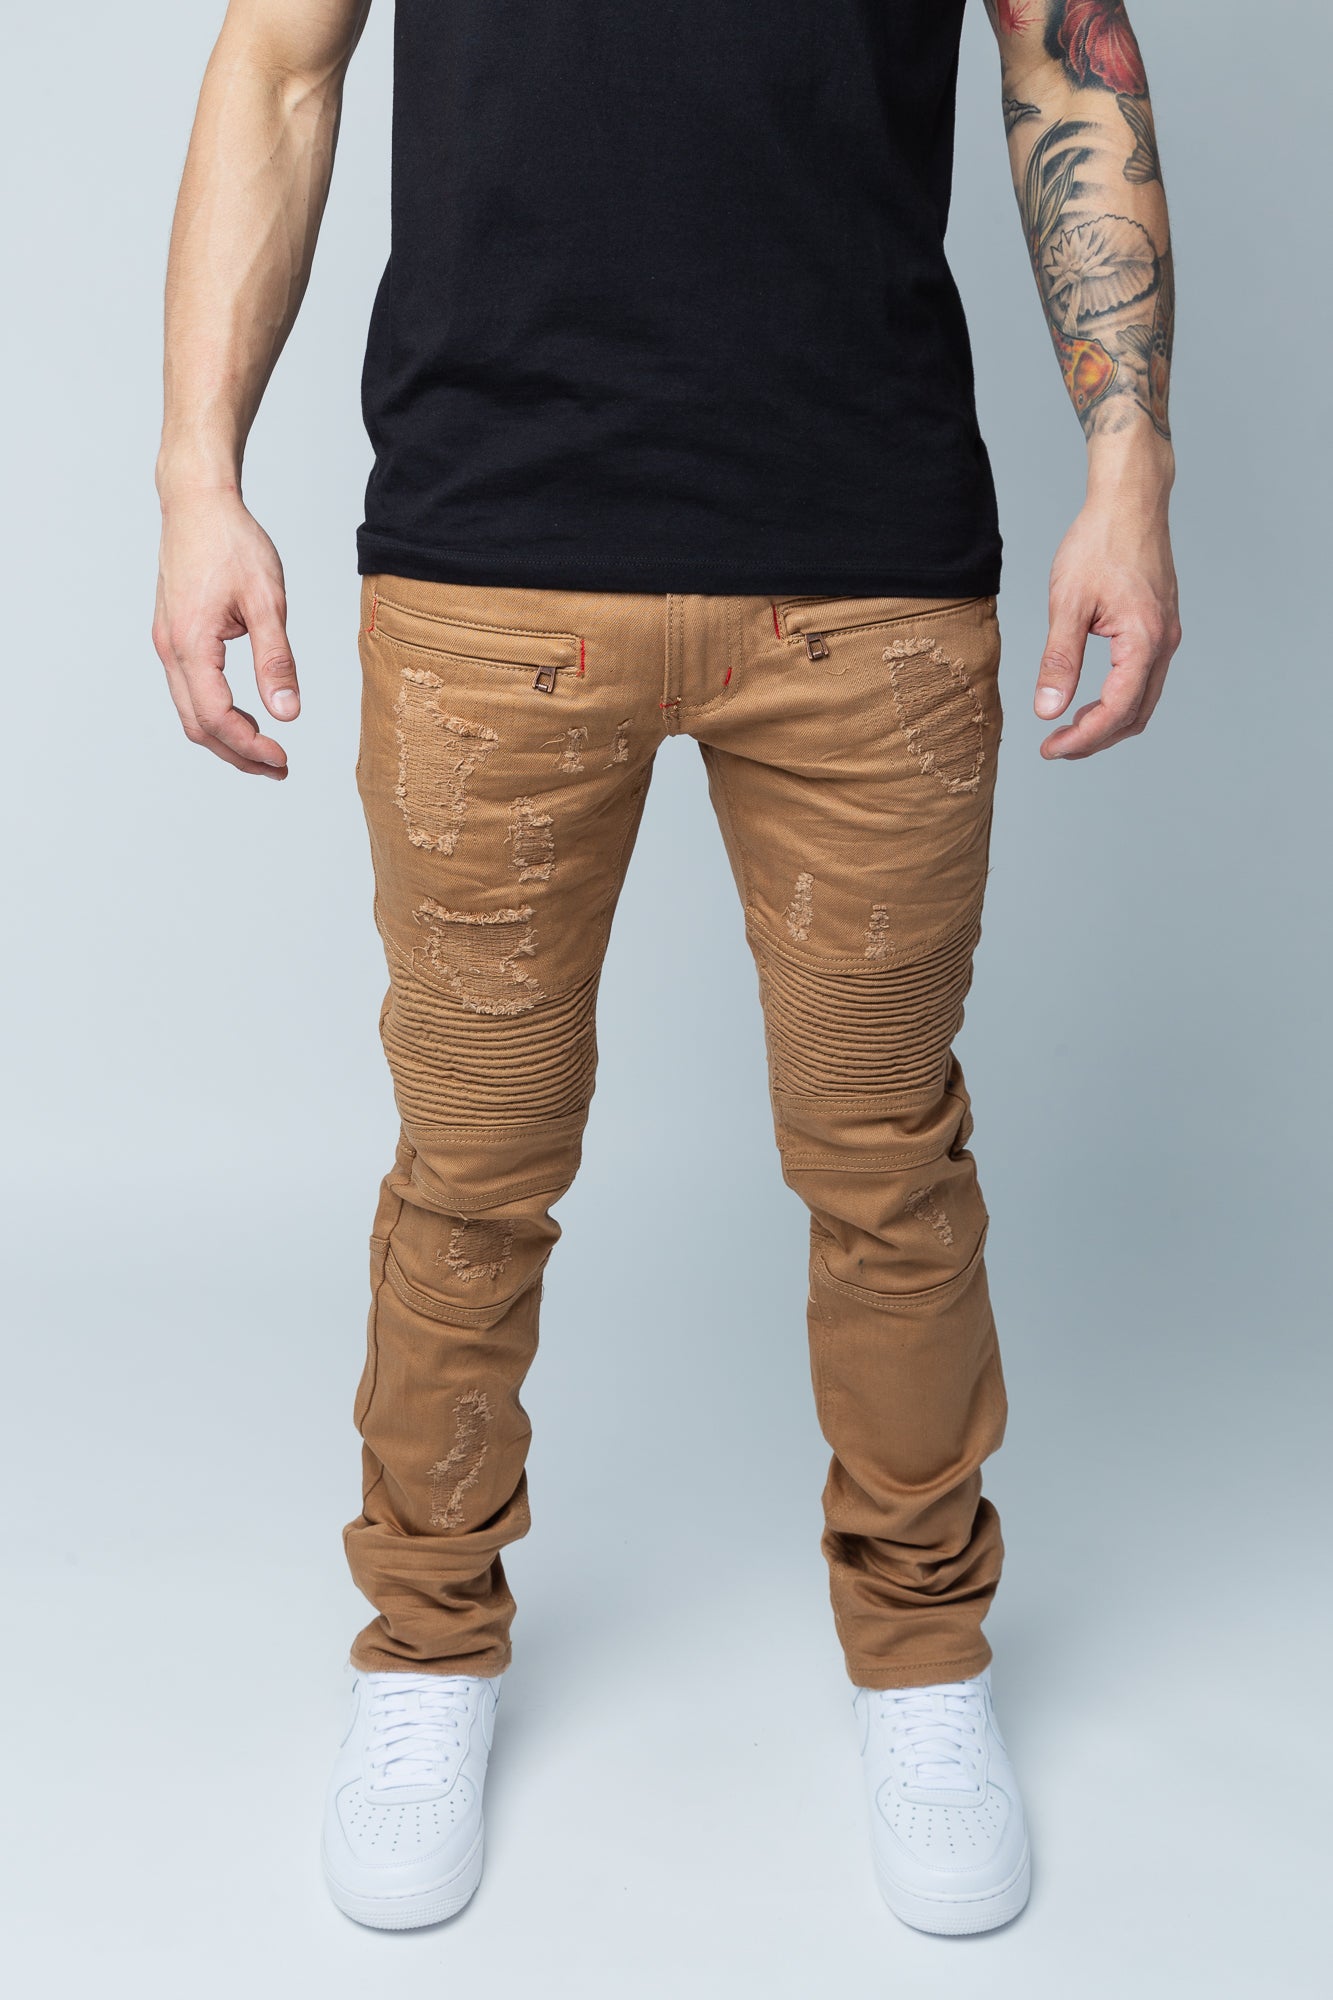 Khaki high-quality denim made from 98% cotton and 2% spandex. With its rip and repair design and slim fit, it's the ultimate blend of style and comfort.